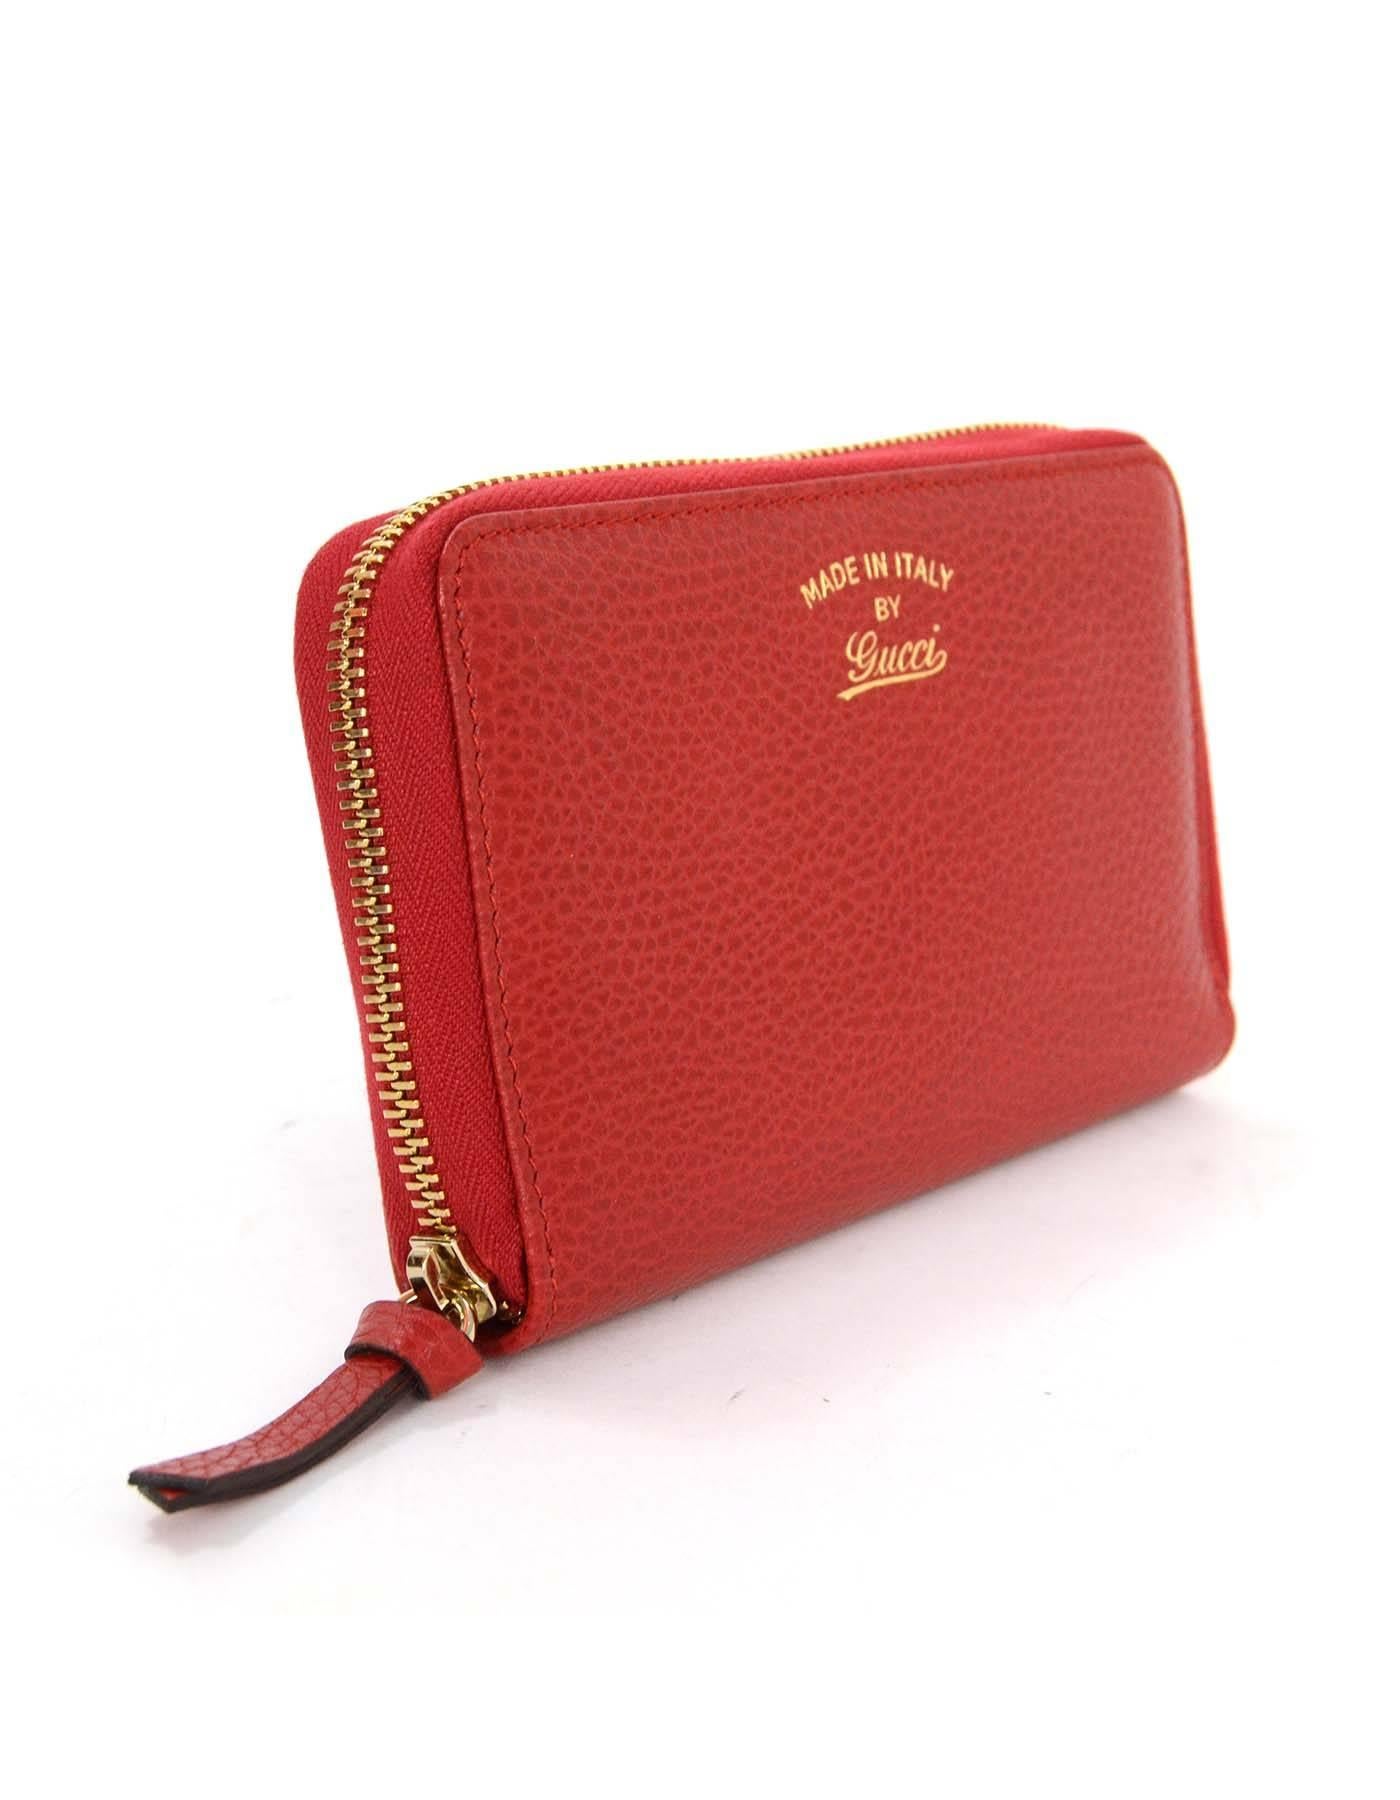 Gucci Red Leather Swing Zippy Wallet 
Features 